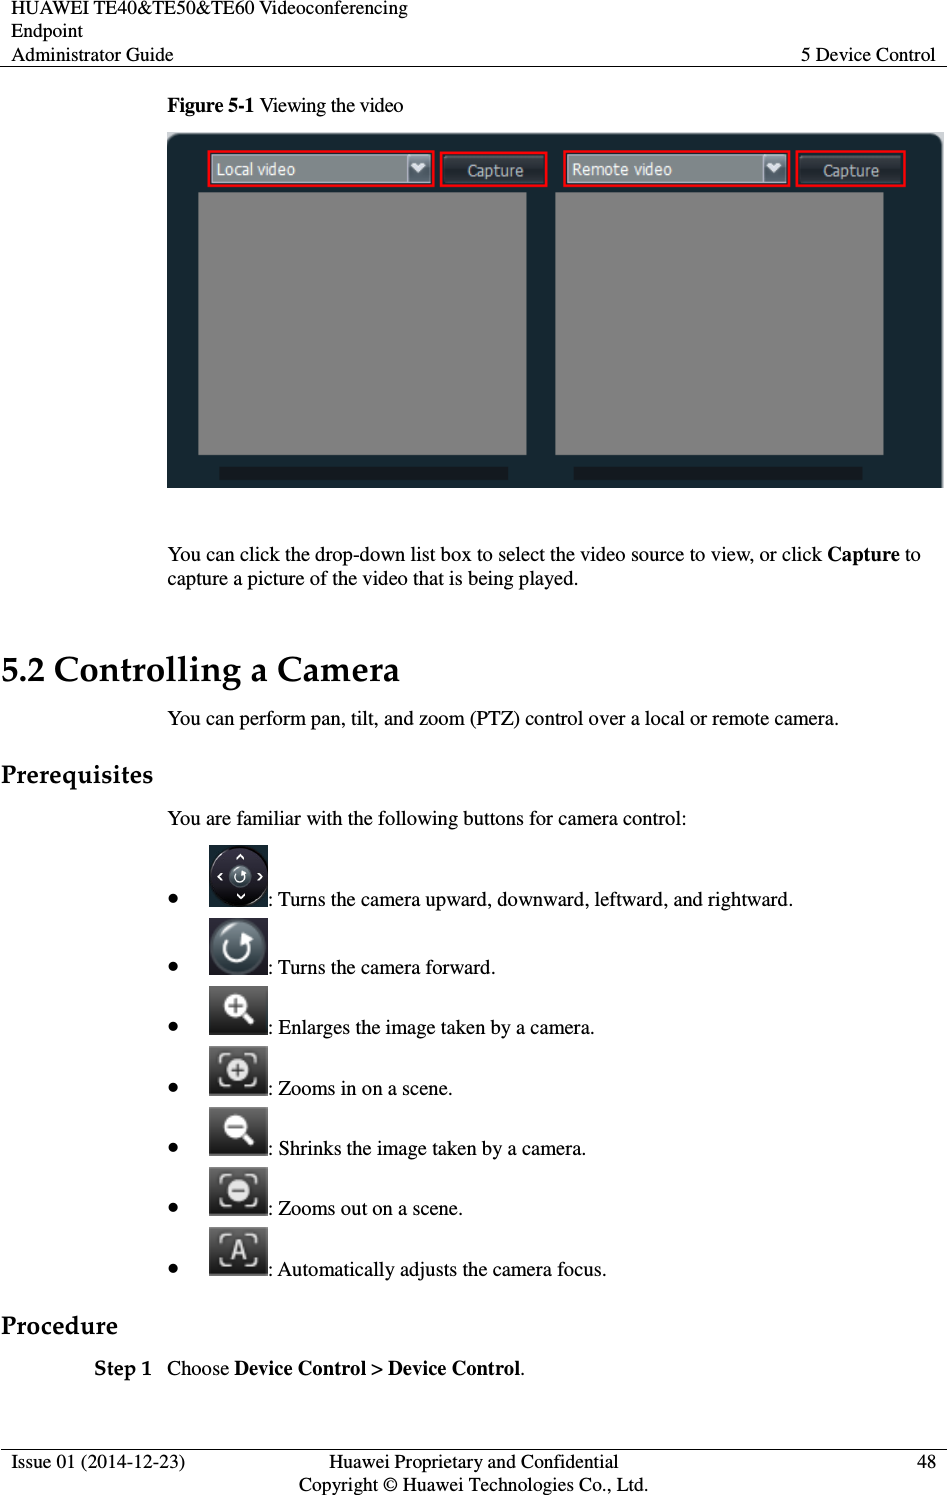 HUAWEI TE40&amp;TE50&amp;TE60 Videoconferencing Endpoint Administrator Guide  5 Device Control  Issue 01 (2014-12-23)  Huawei Proprietary and Confidential                                     Copyright © Huawei Technologies Co., Ltd. 48  Figure 5-1 Viewing the video   You can click the drop-down list box to select the video source to view, or click Capture to capture a picture of the video that is being played. 5.2 Controlling a Camera You can perform pan, tilt, and zoom (PTZ) control over a local or remote camera. Prerequisites You are familiar with the following buttons for camera control:  : Turns the camera upward, downward, leftward, and rightward.  : Turns the camera forward.  : Enlarges the image taken by a camera.  : Zooms in on a scene.  : Shrinks the image taken by a camera.  : Zooms out on a scene.  : Automatically adjusts the camera focus.   Procedure Step 1 Choose Device Control &gt; Device Control. 